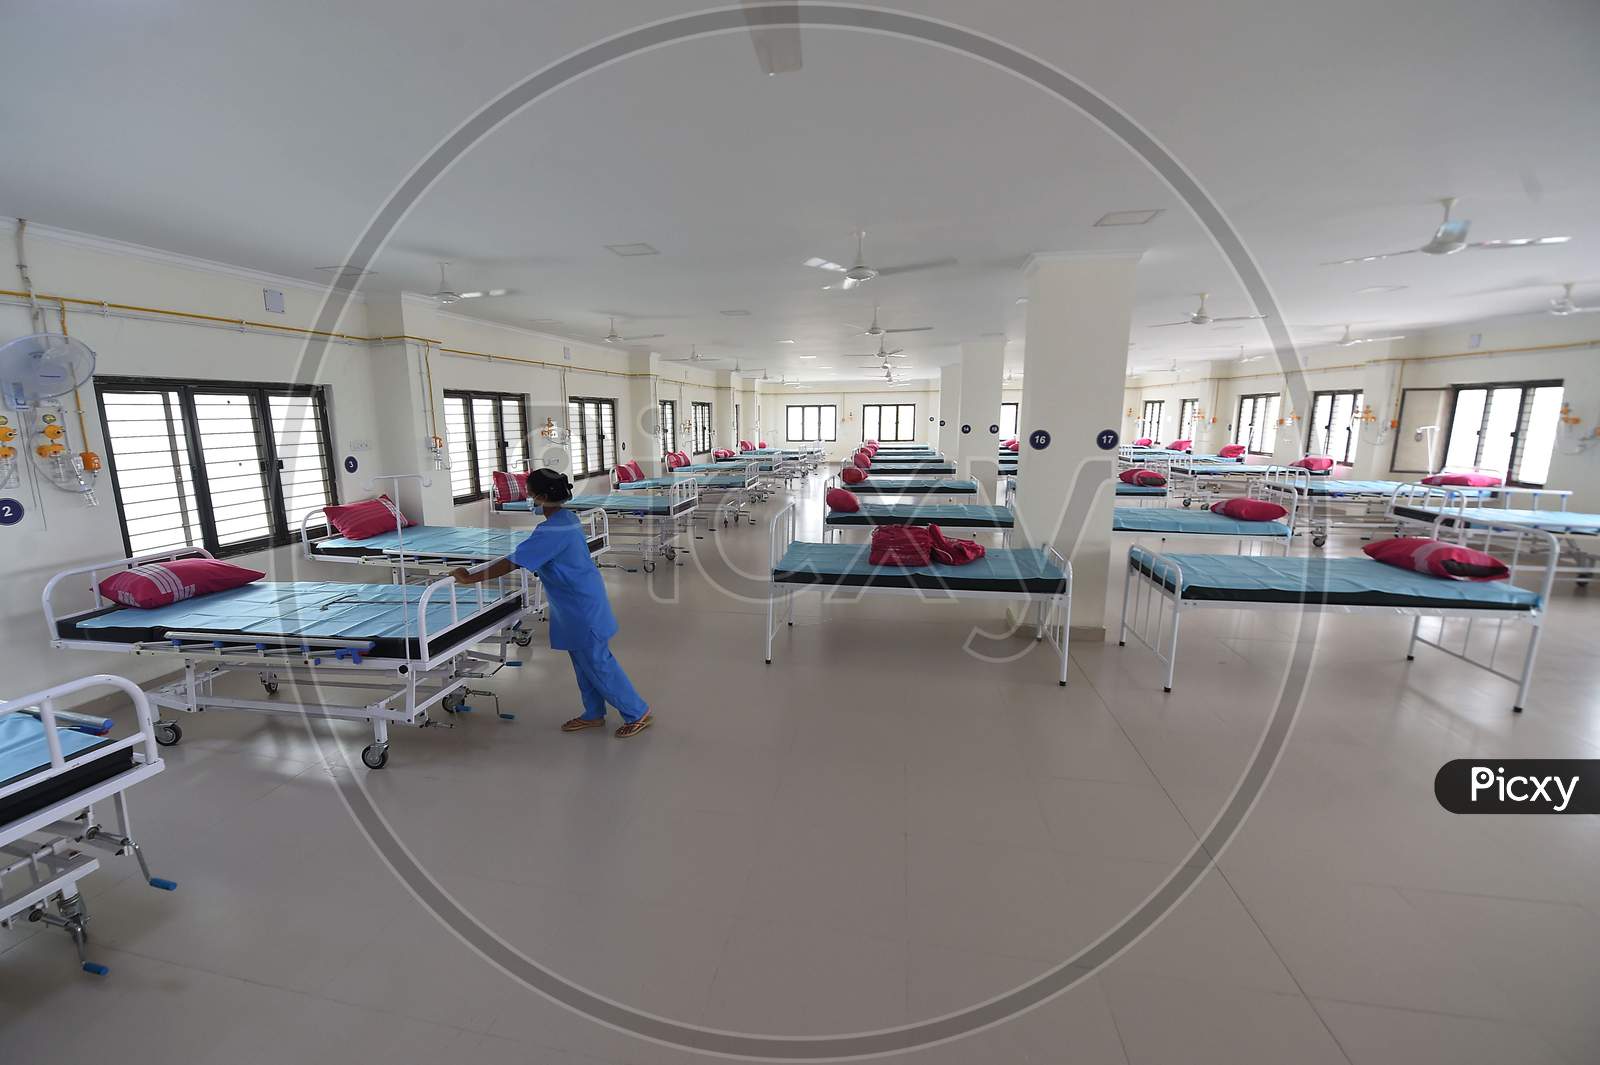 Health care worker arranges beds to convert a building which belonged to the National Institute of Ageing into a dedicated Covid-19 Care Centre in Chennai, Tamil Nadu on July 07, 2020